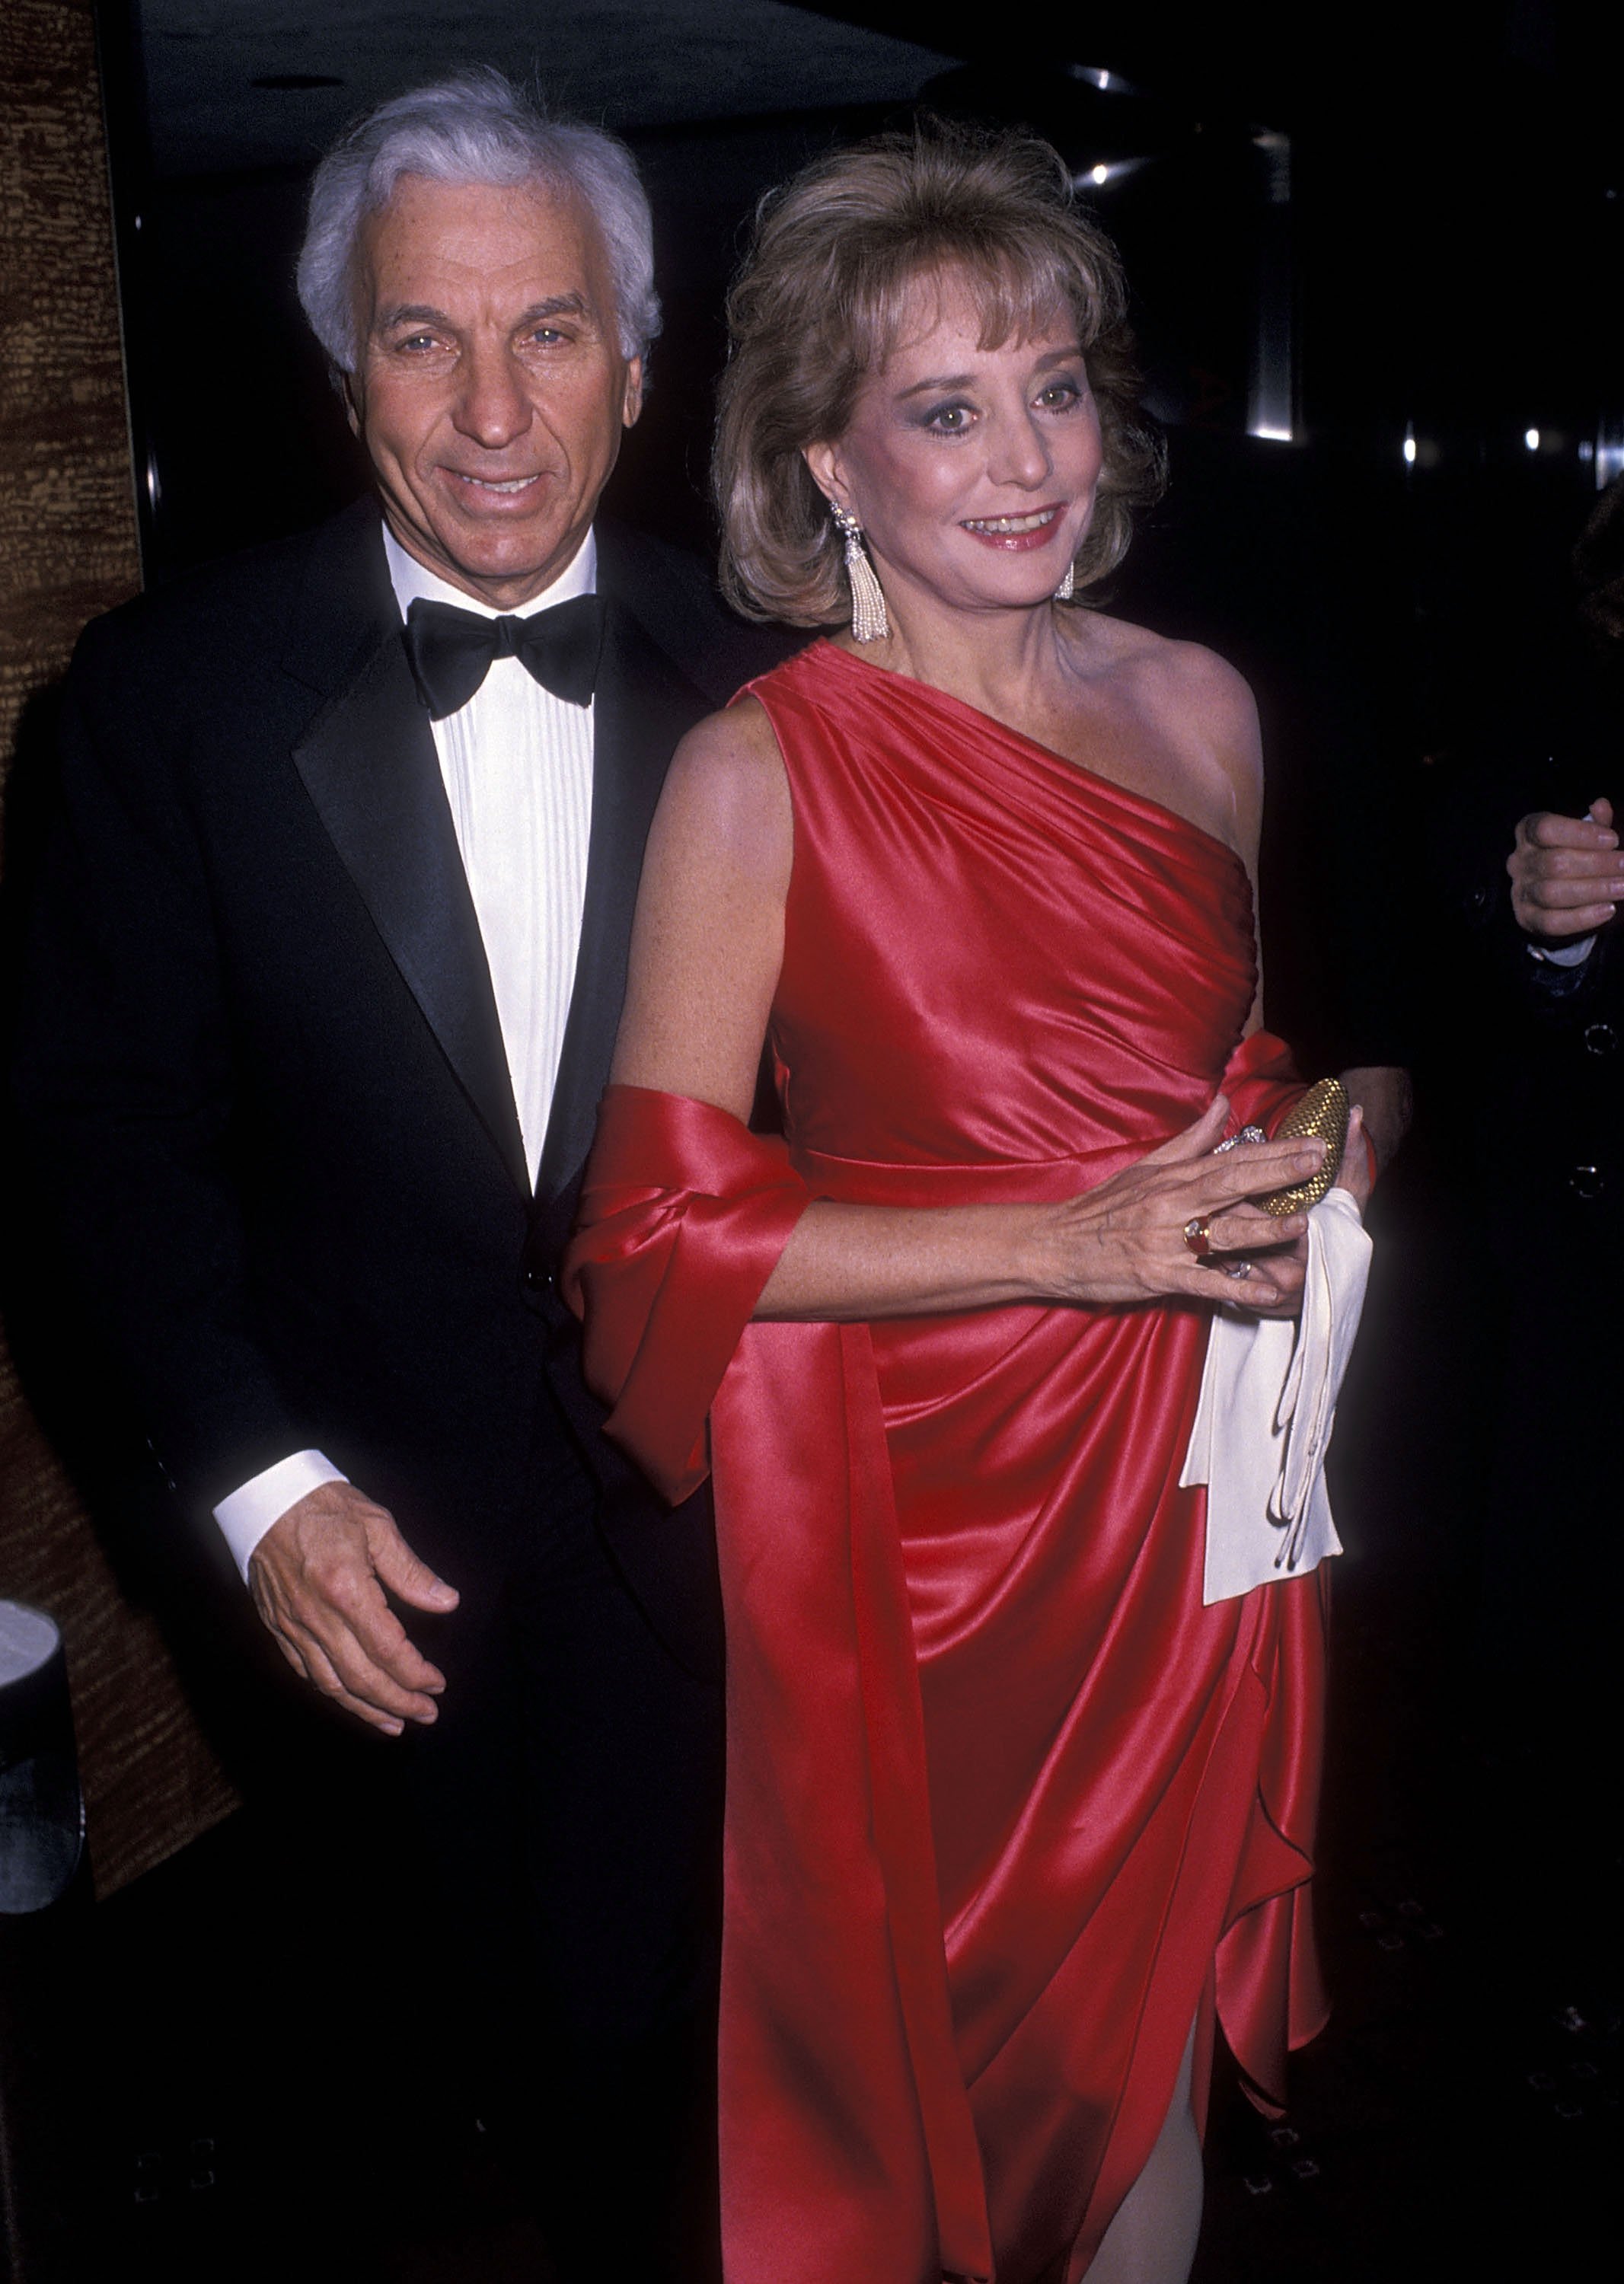 Barbara Walters and Merv Adelson attend the American Museum of the Moving Image Honors Sidney Poitier on February 28, 1989 at the Waldorf-Astoria Hotel in New York City. | Photo: GettyImages